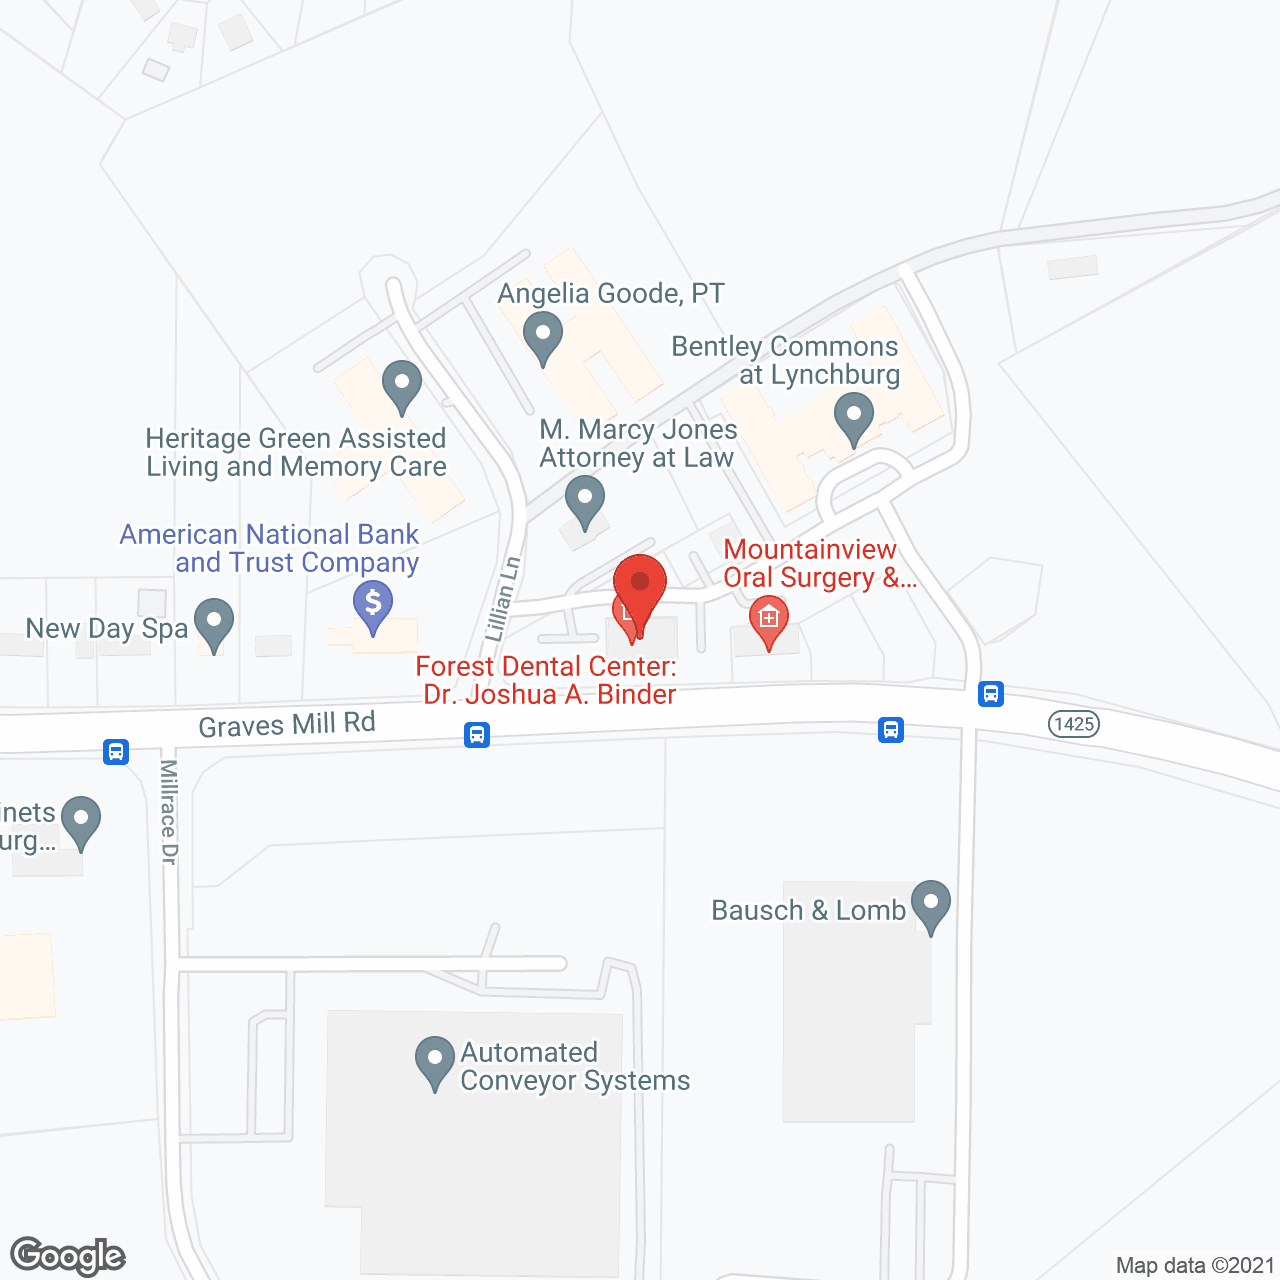 Bentley Commons at Lynchburg in google map